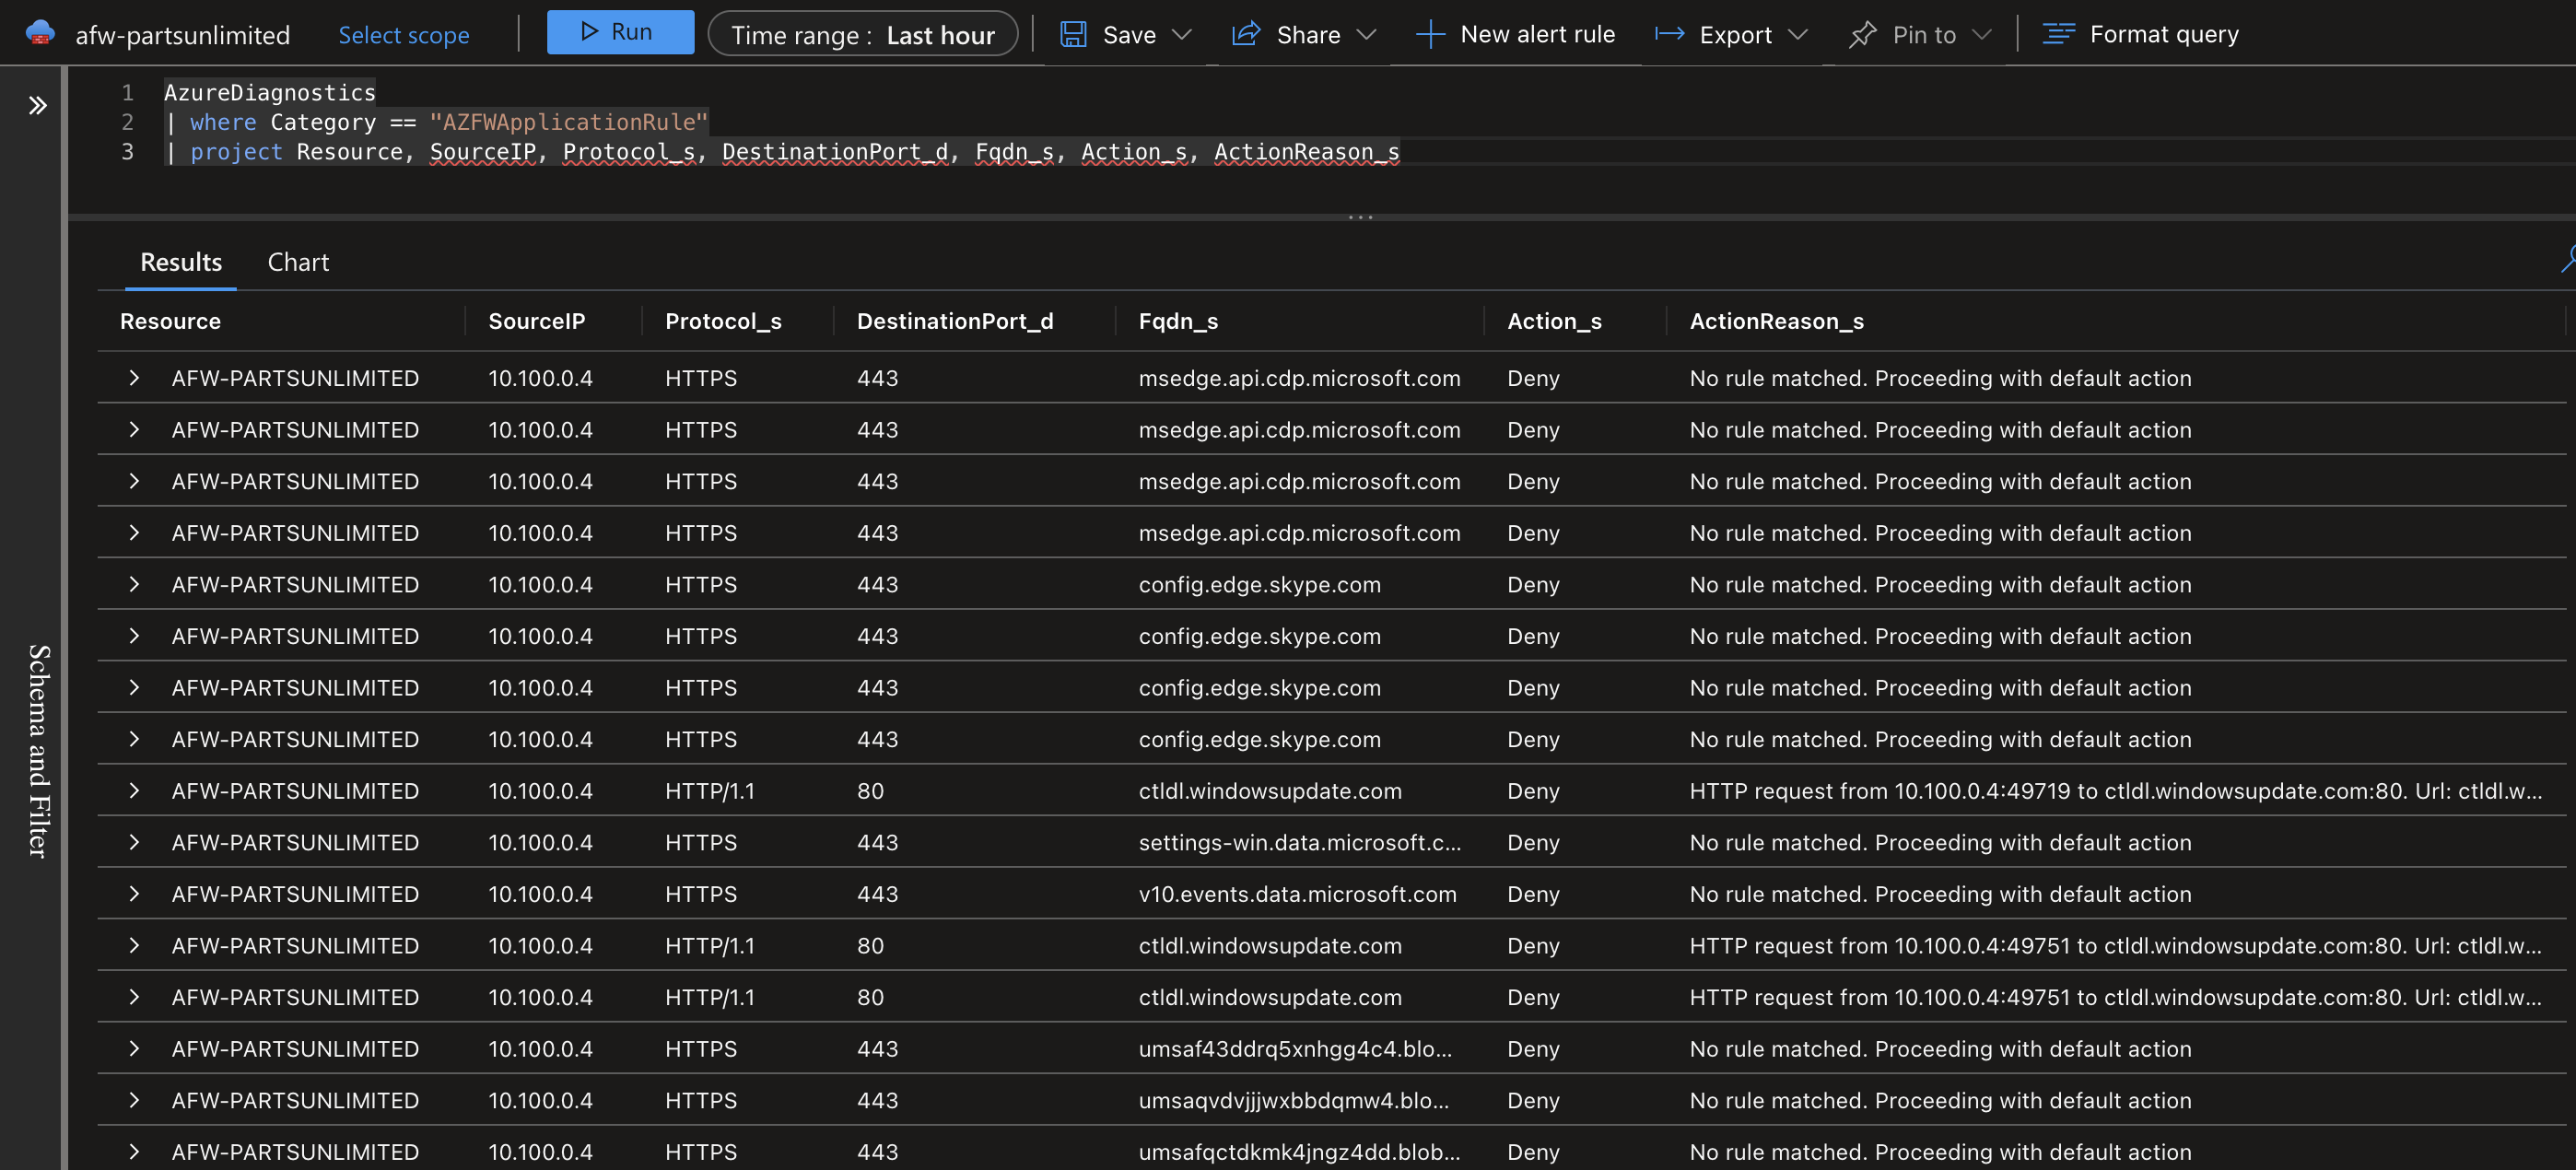 Screenshot showing a log analytics query on firewall traffic, showing lots of calls to multiple Microsoft-owned domains that are all denied by default behavior.